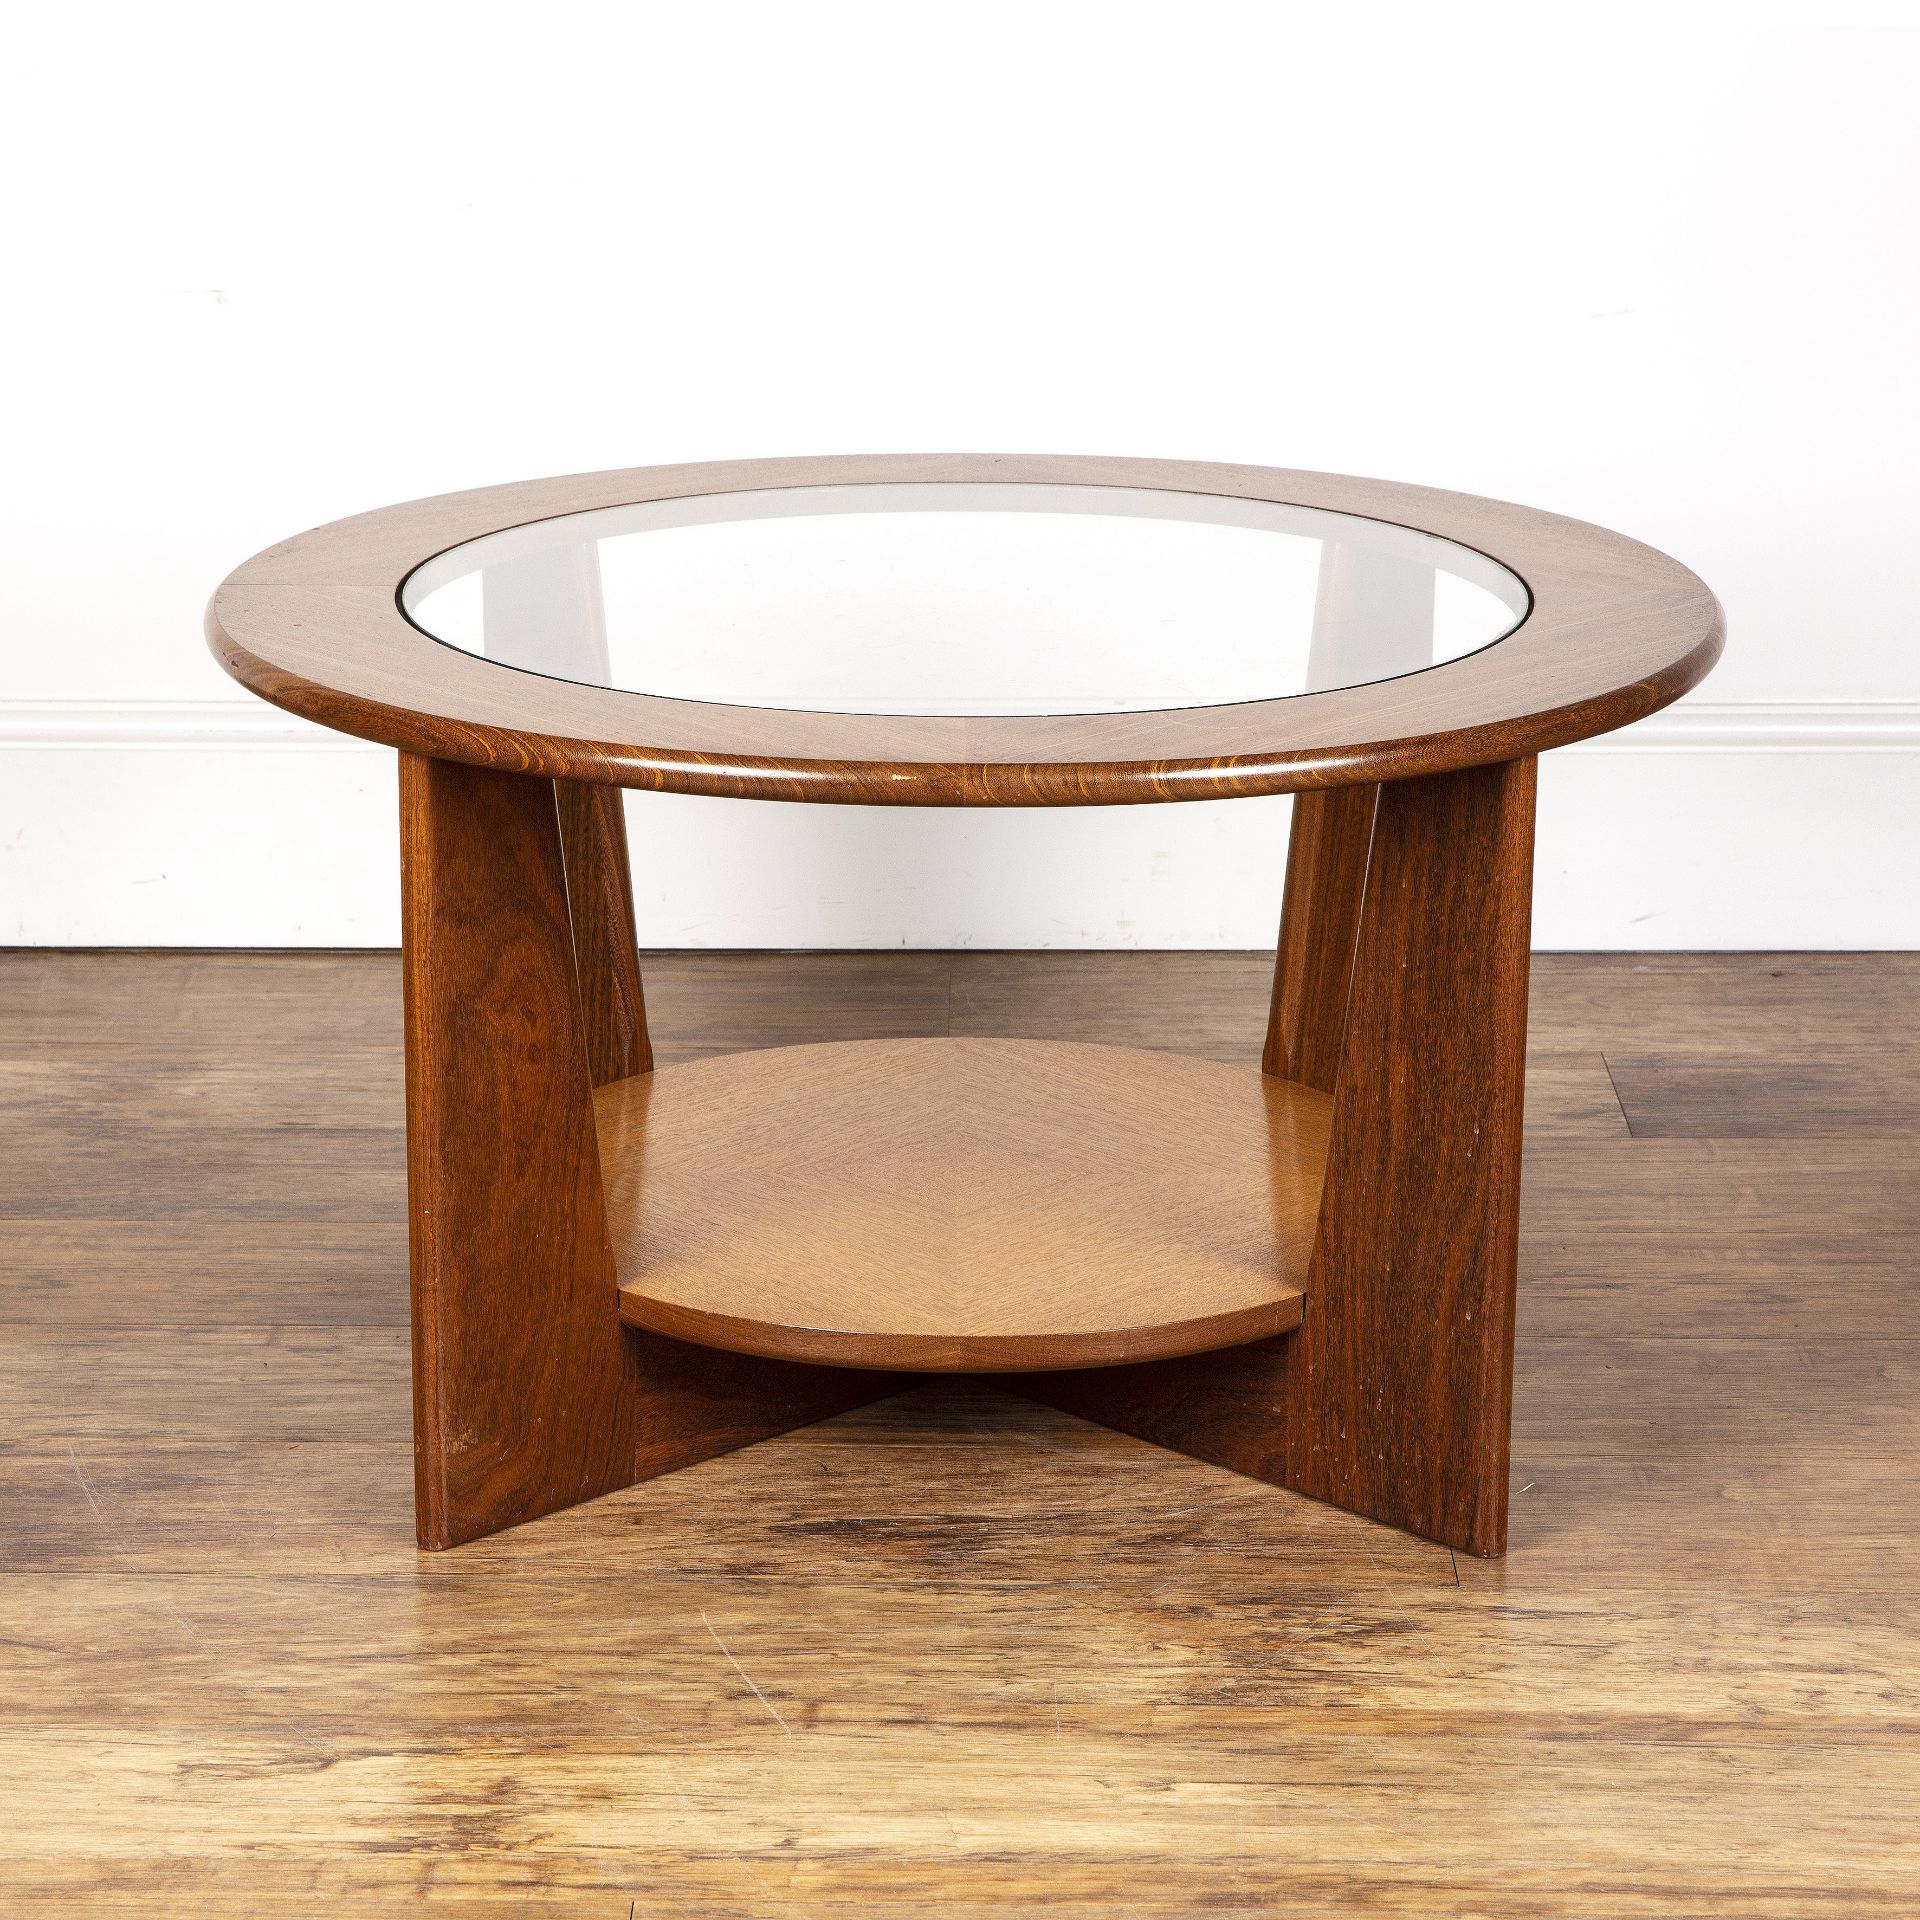 Attributed to G-plan teak, circular coffee table with glass inset top, unmarked, 77.5cm wide x